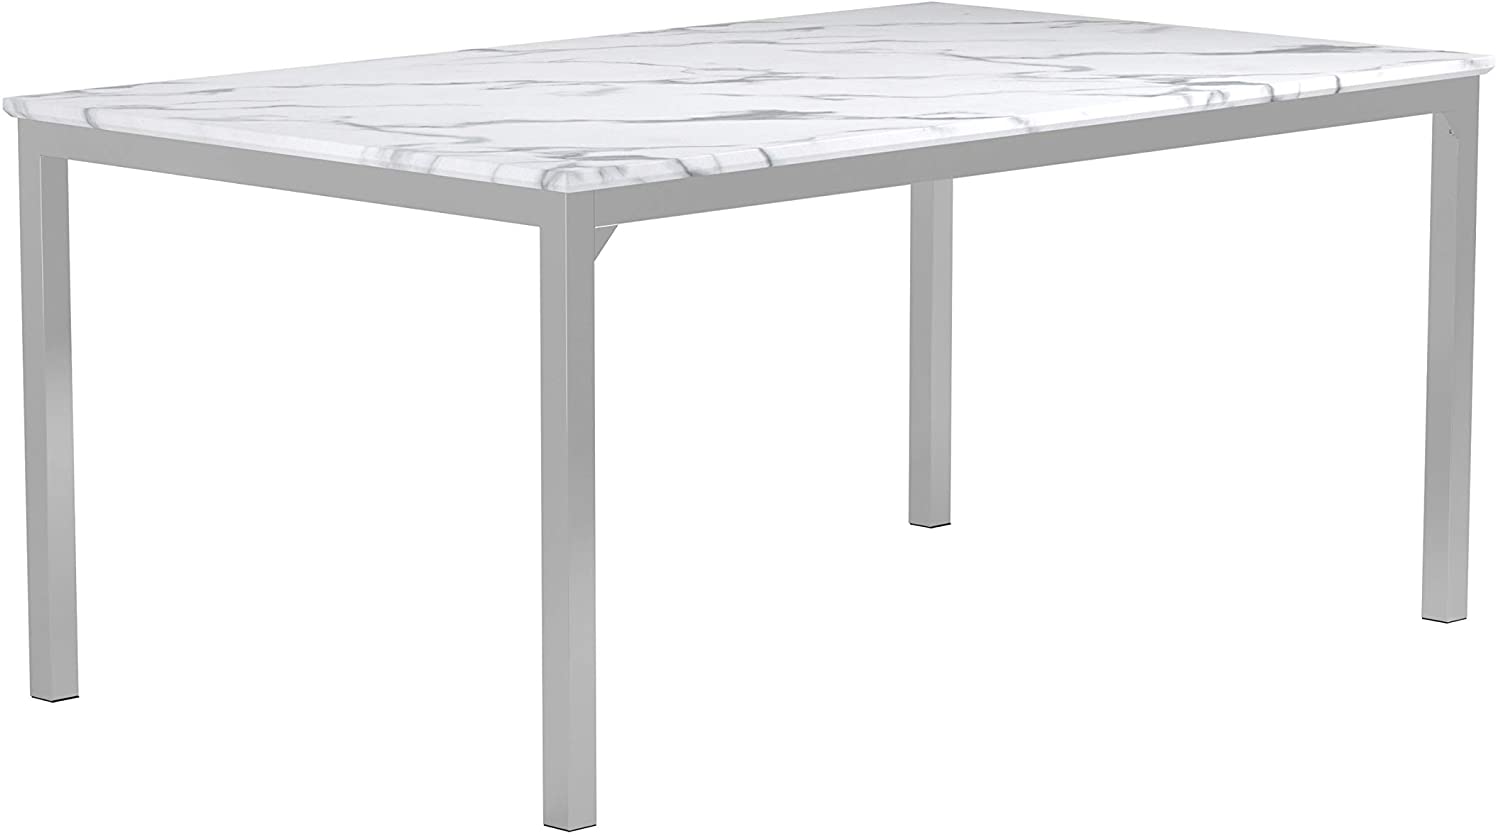 B08FT28TB4 Coaster Home Furnishings Athena Rectangle Marble Top Dining Table, Carrara Mable and Chrome